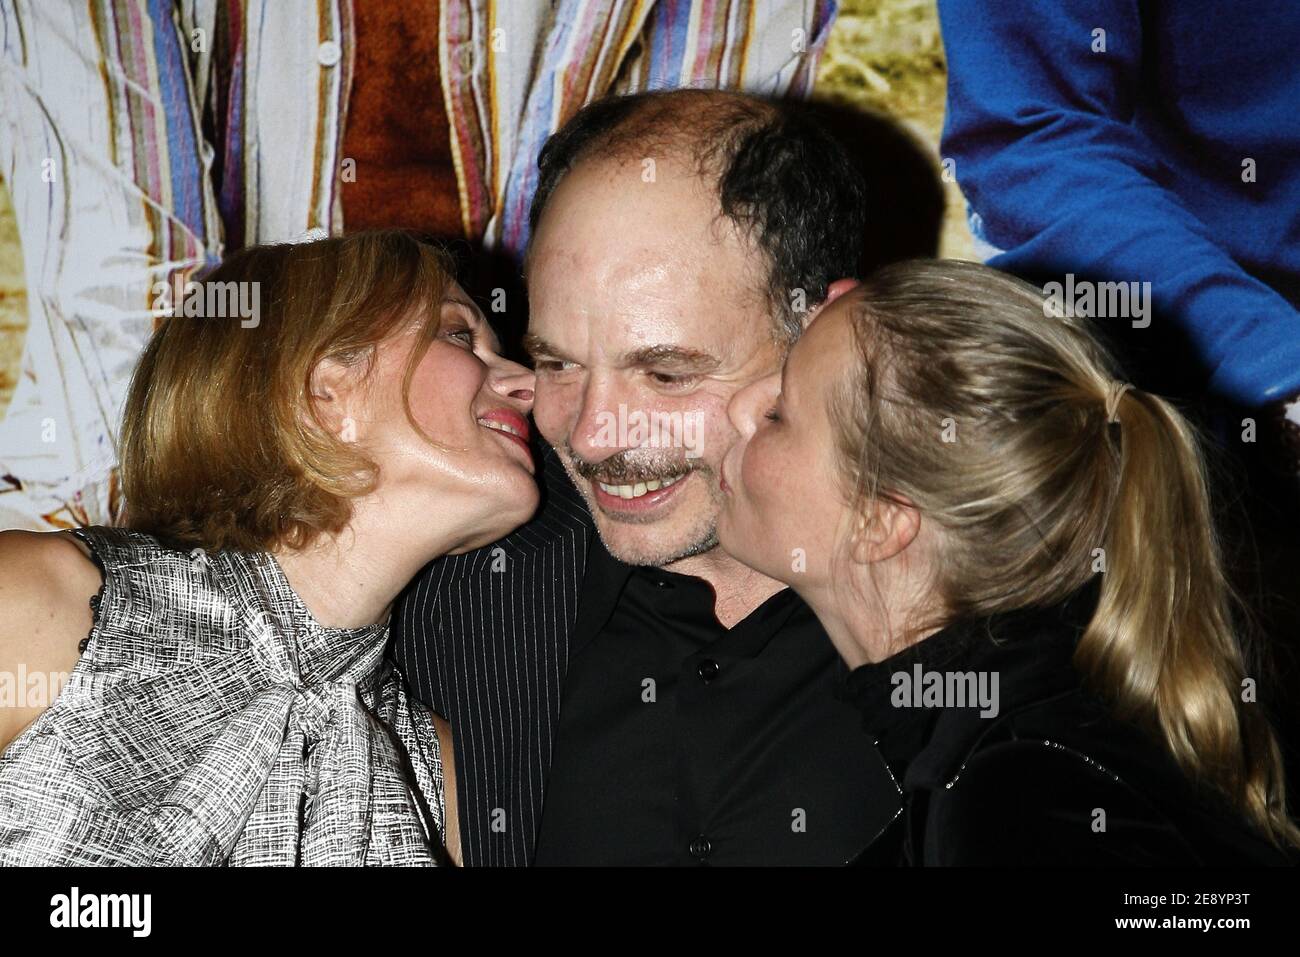 Valerie Stroh, Jean-Pierre Darroussin and Florence Thomassin attend the premiere of Le Coeur des Hommes 2, held at the Gaumont Marignan theater in Paris, France, on October 15, 2007. Photo by Thierry Orban/ABACAPRESS.COM Stock Photo